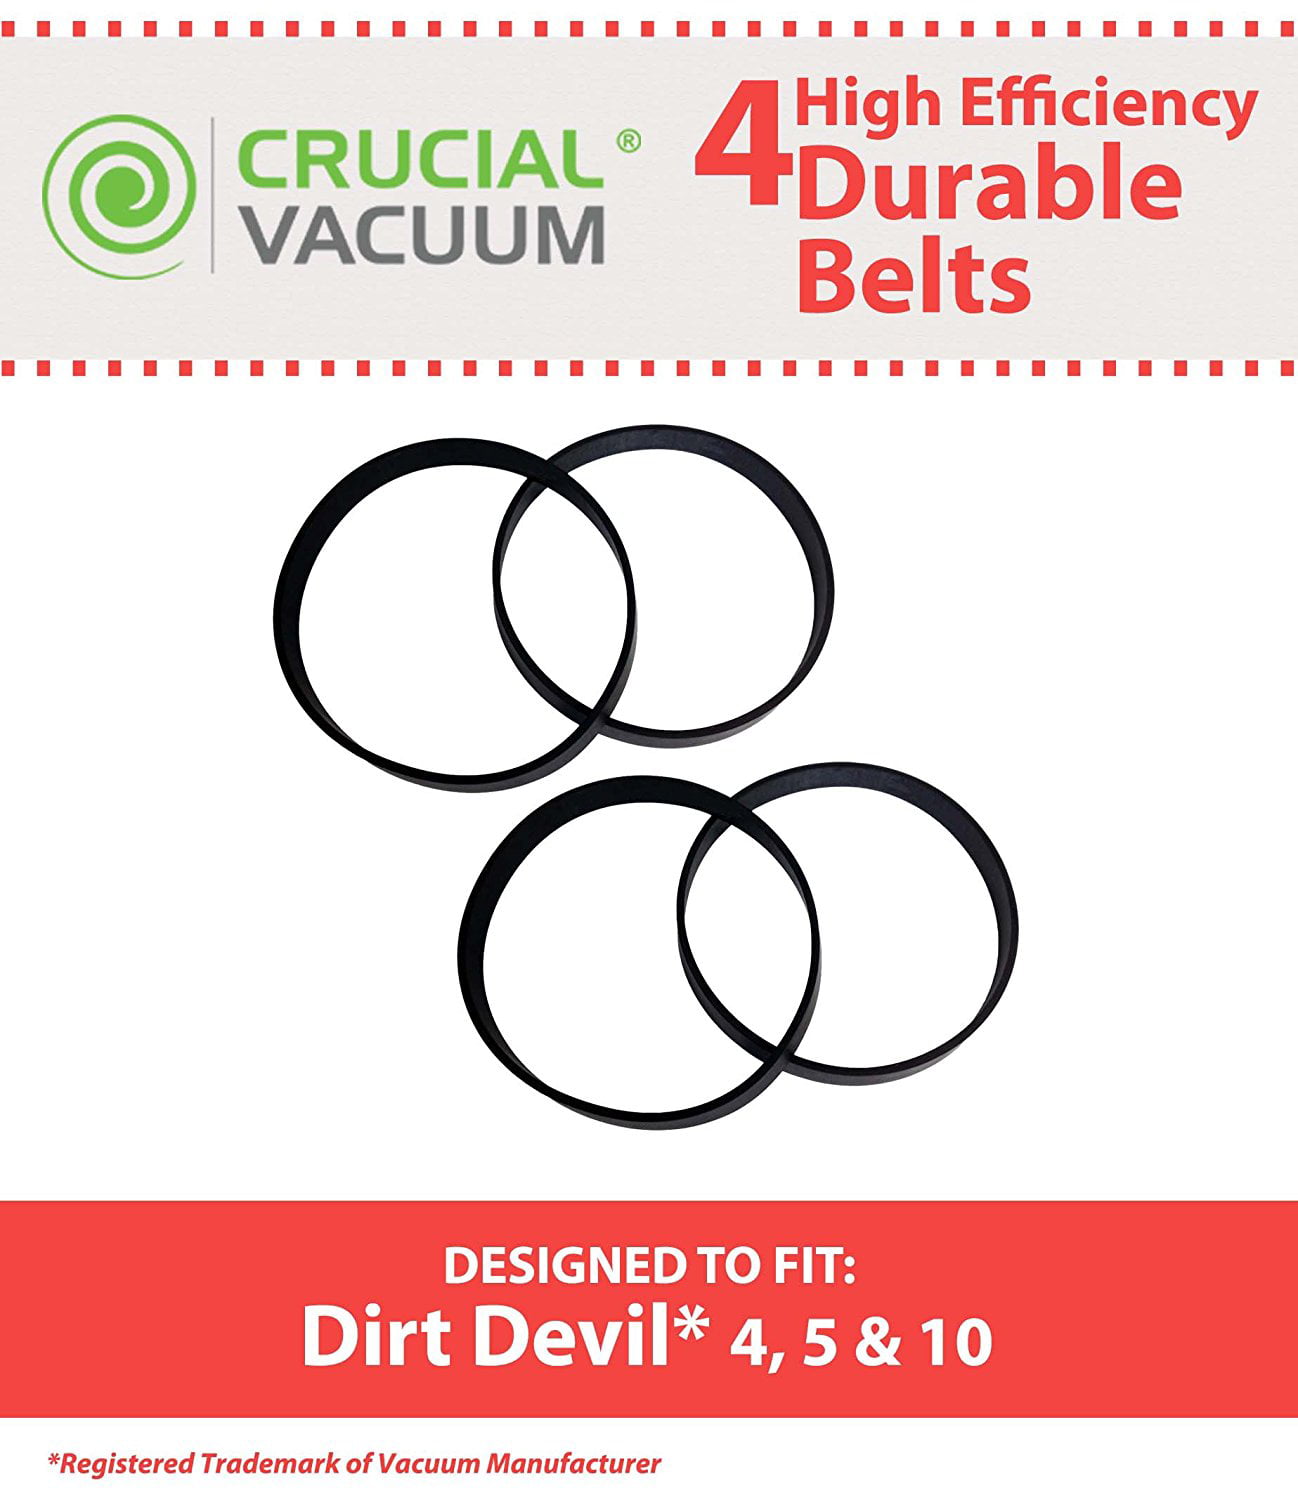 Swivel Glide Vision Uprights Featherlite 3720310001 1LU0310X00 5 & 10 Durable Vacuum Belts Designed To Fit Dirt Devil Fantom Fury 2 Dirt Devil Style 4 Compare To Part # 1540310001 3860140600 Designed & Engineered by Crucial Vacuum